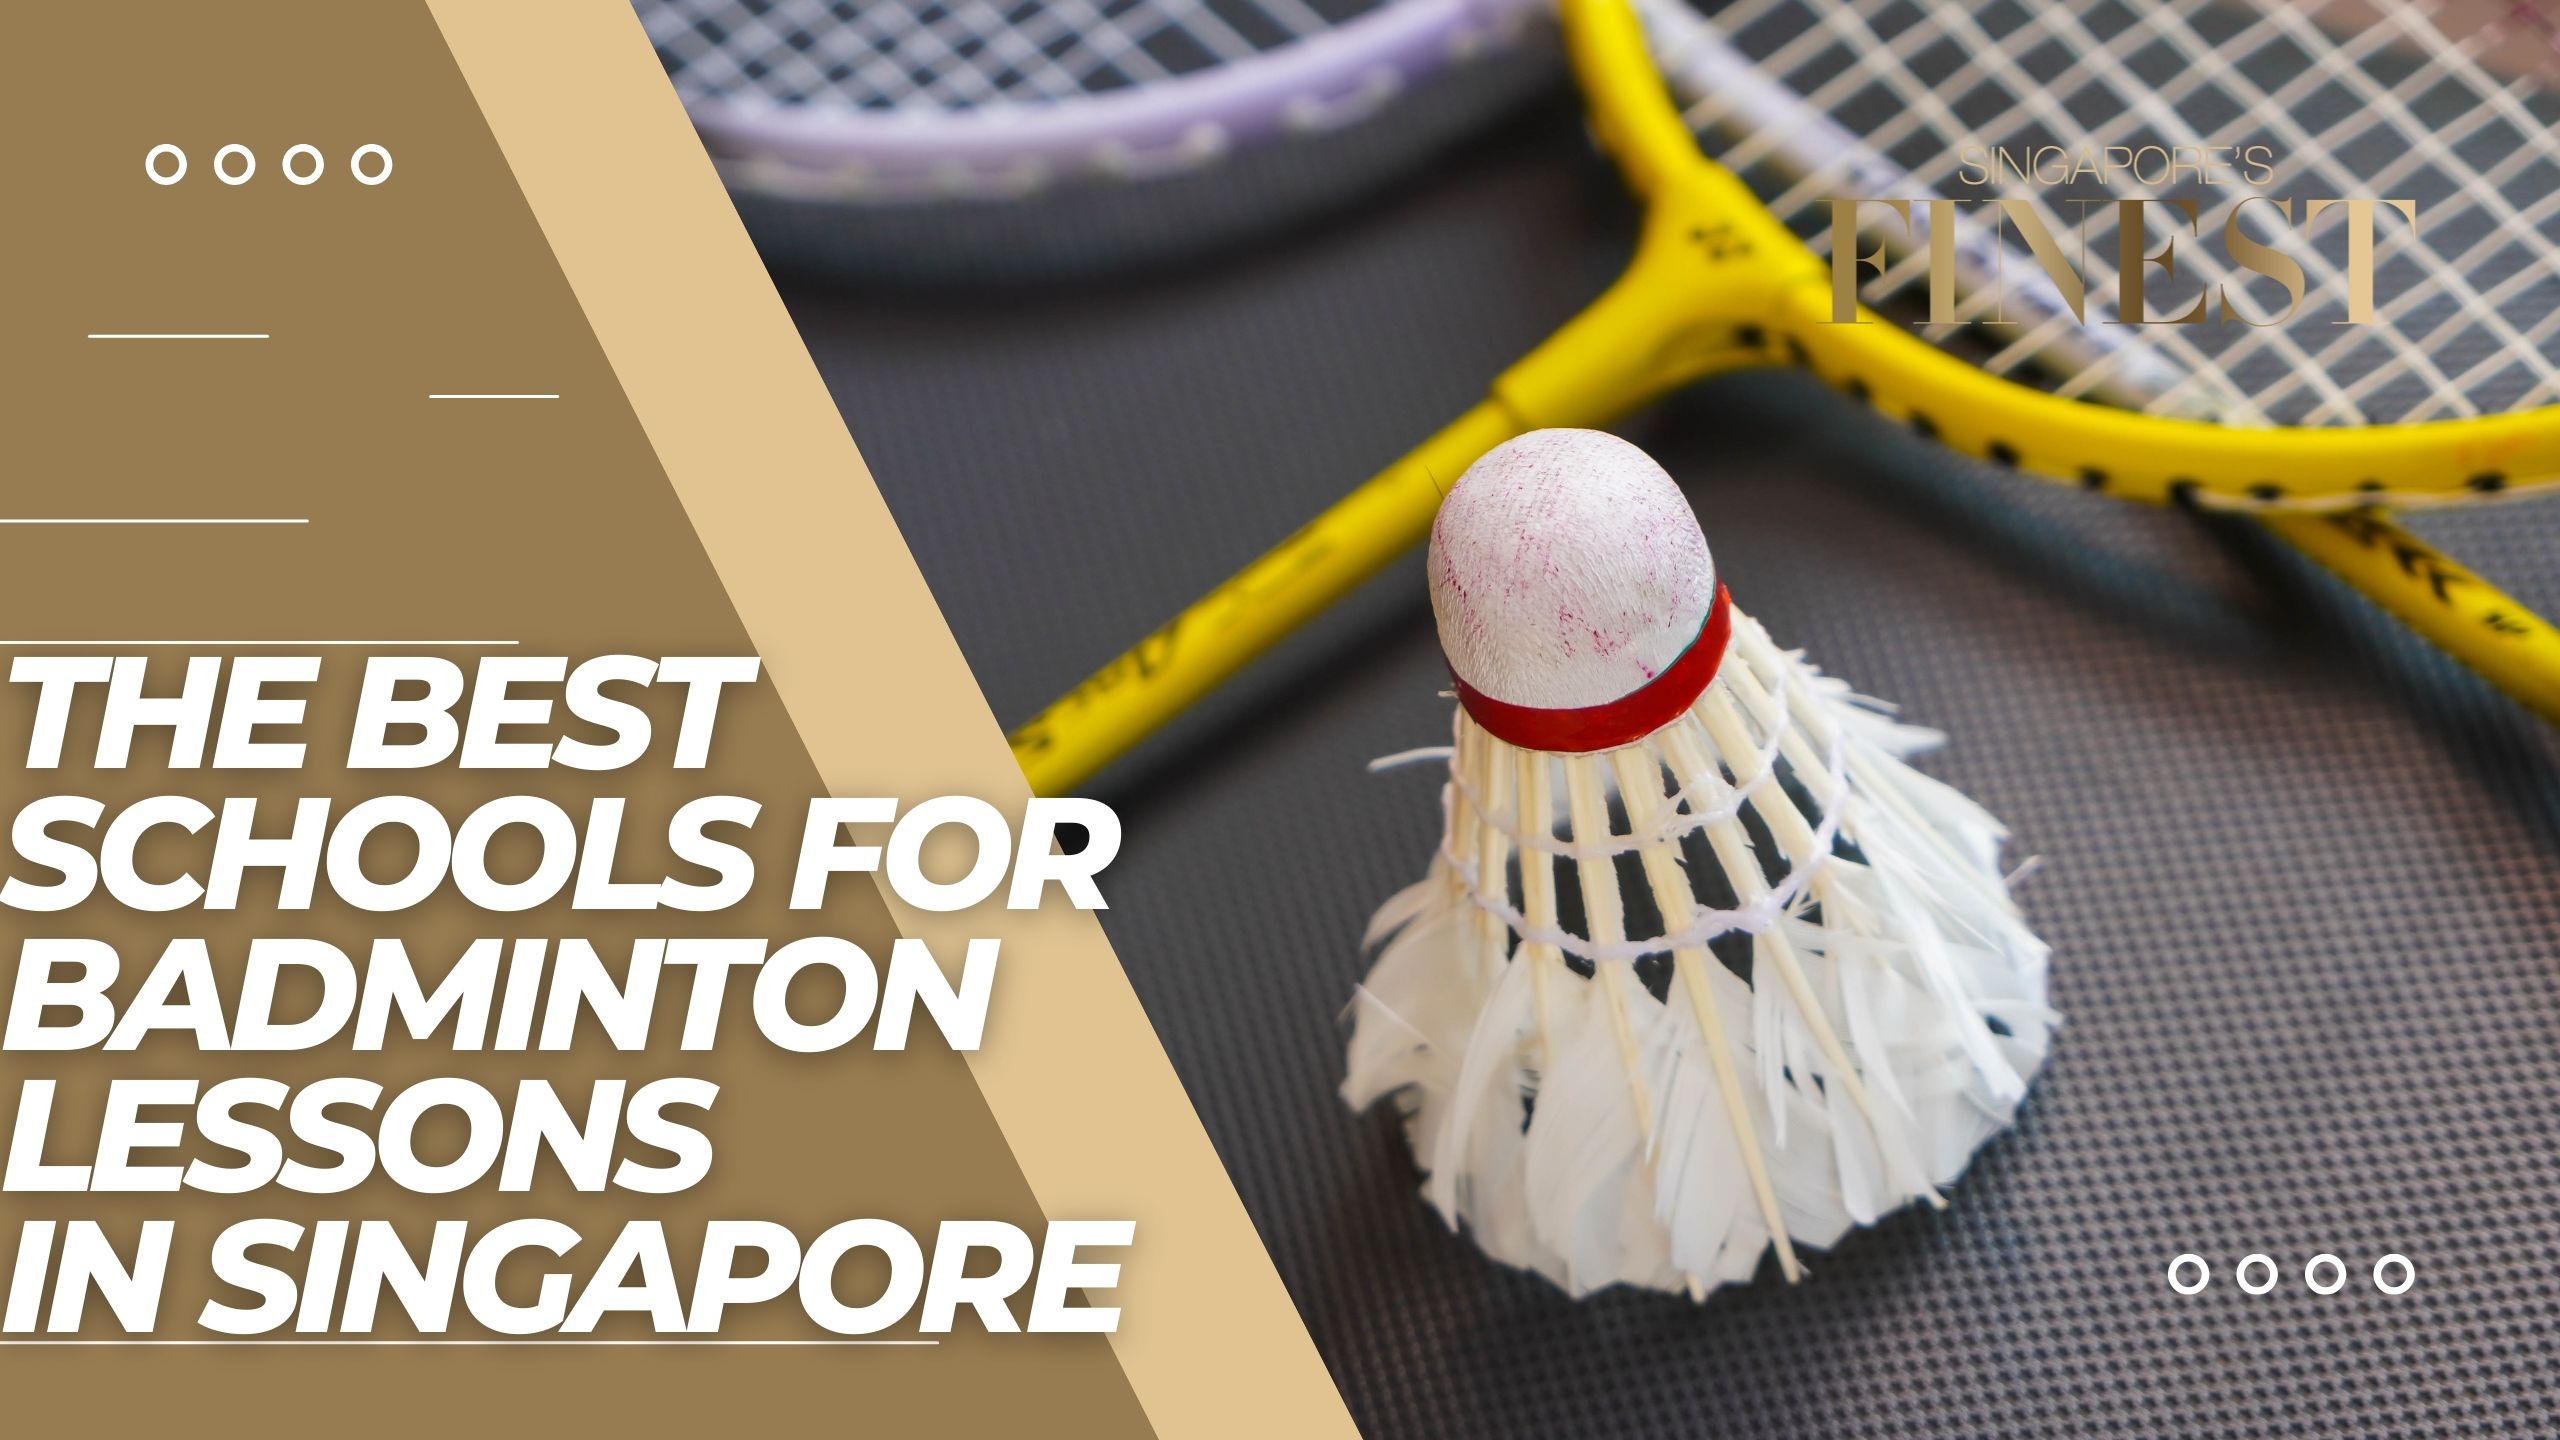 The Finest Schools For Badminton Lessons in Singapore